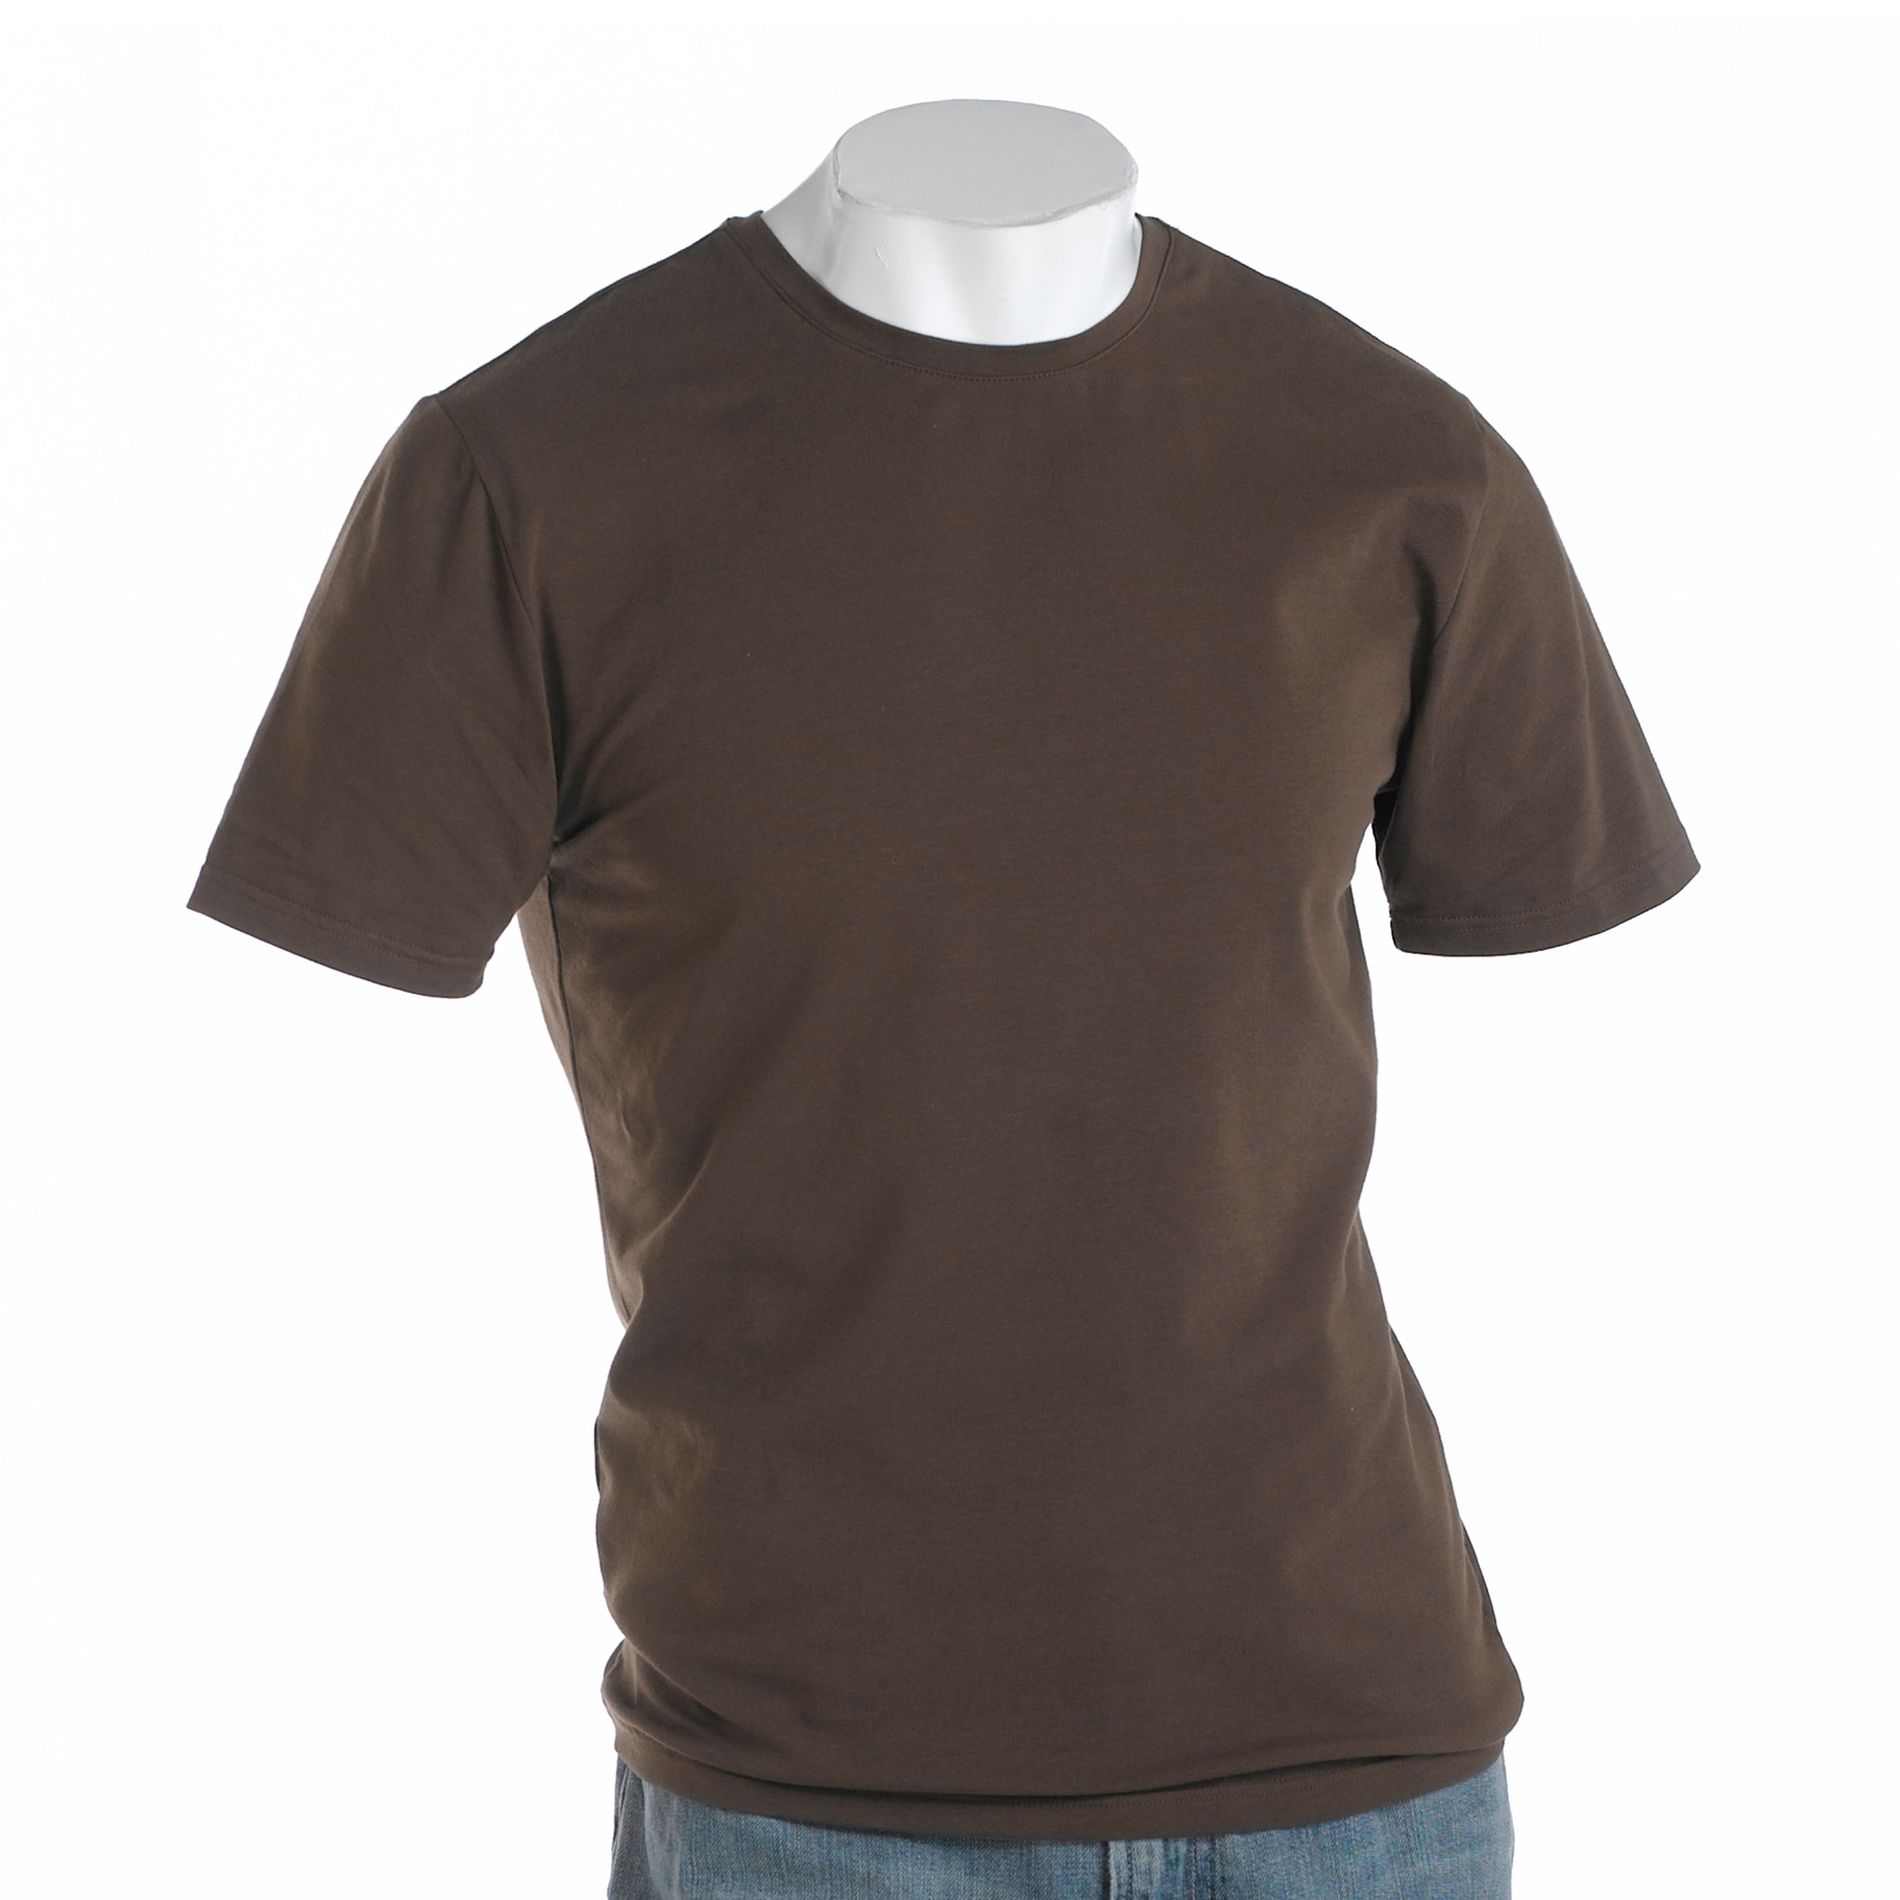 Structure Men's Big & Tall Solid T-Shirt